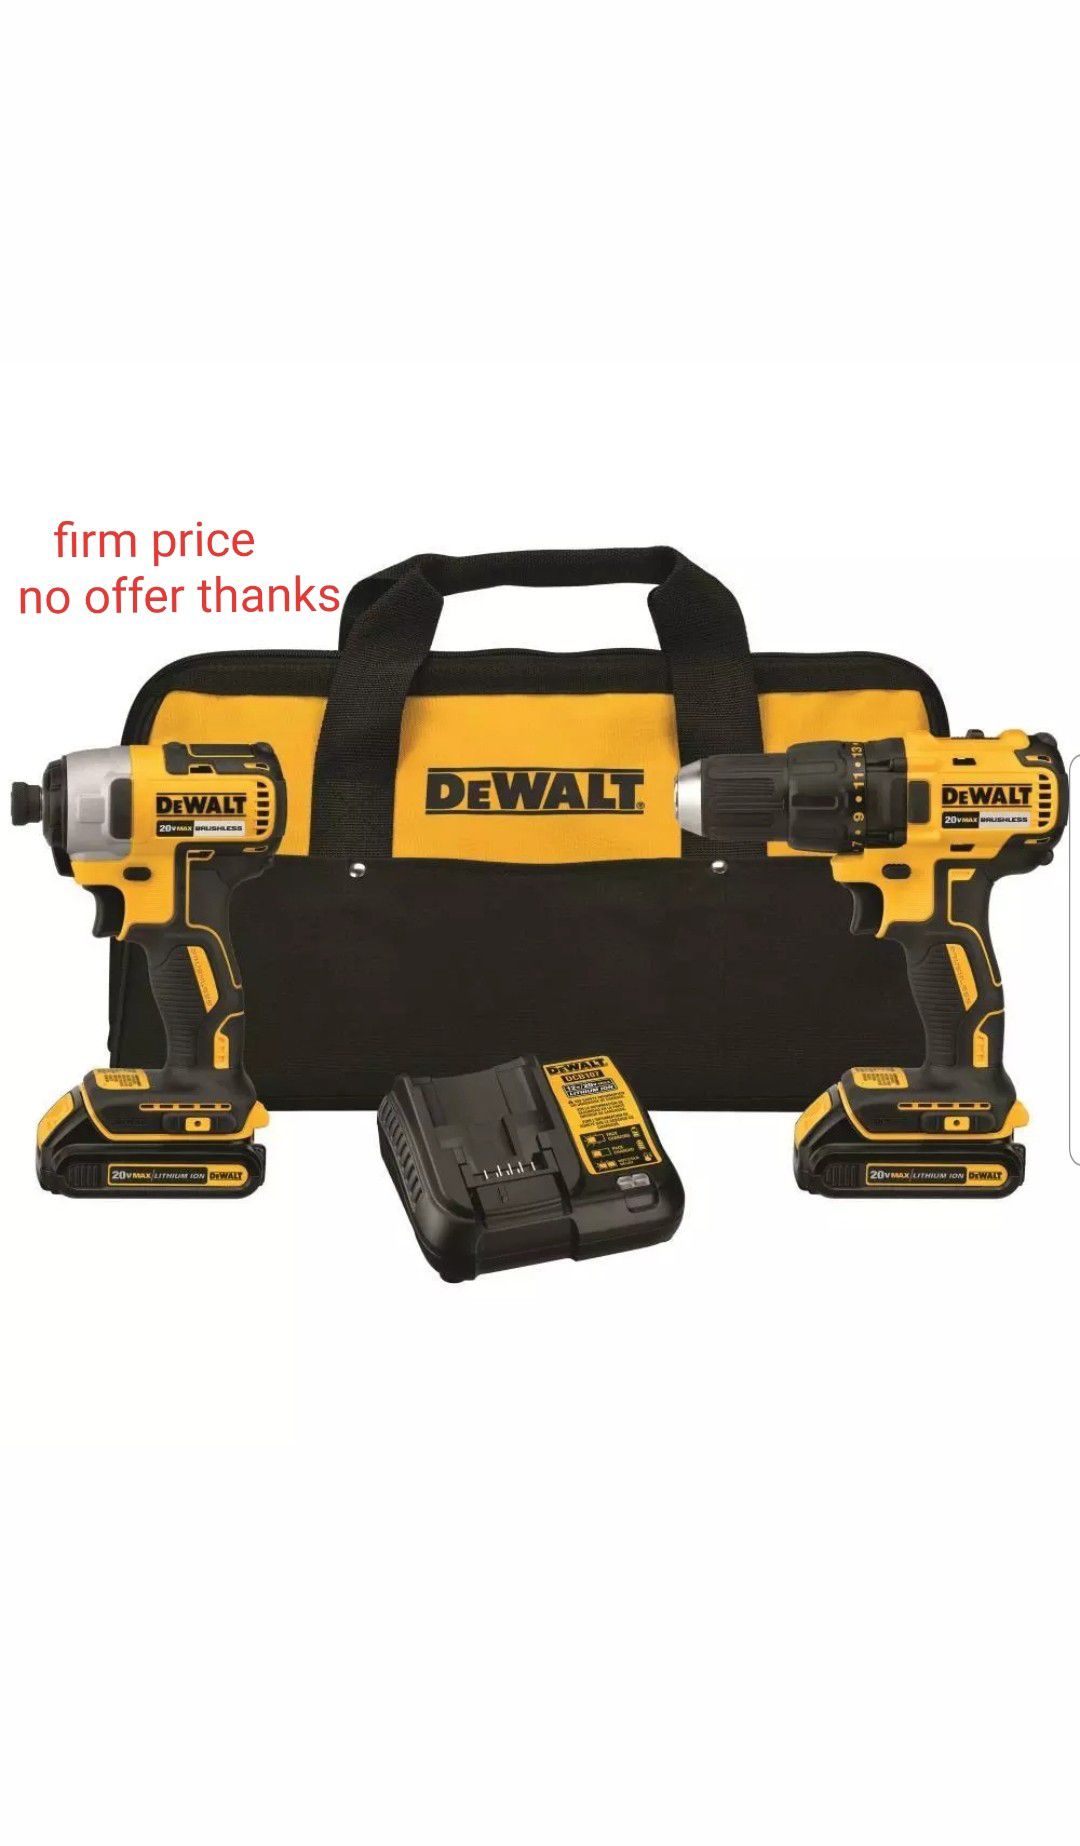 dewalt-dck277c2 20V MAX Compact Brushless Drill / Driver and Impact Driver Kit